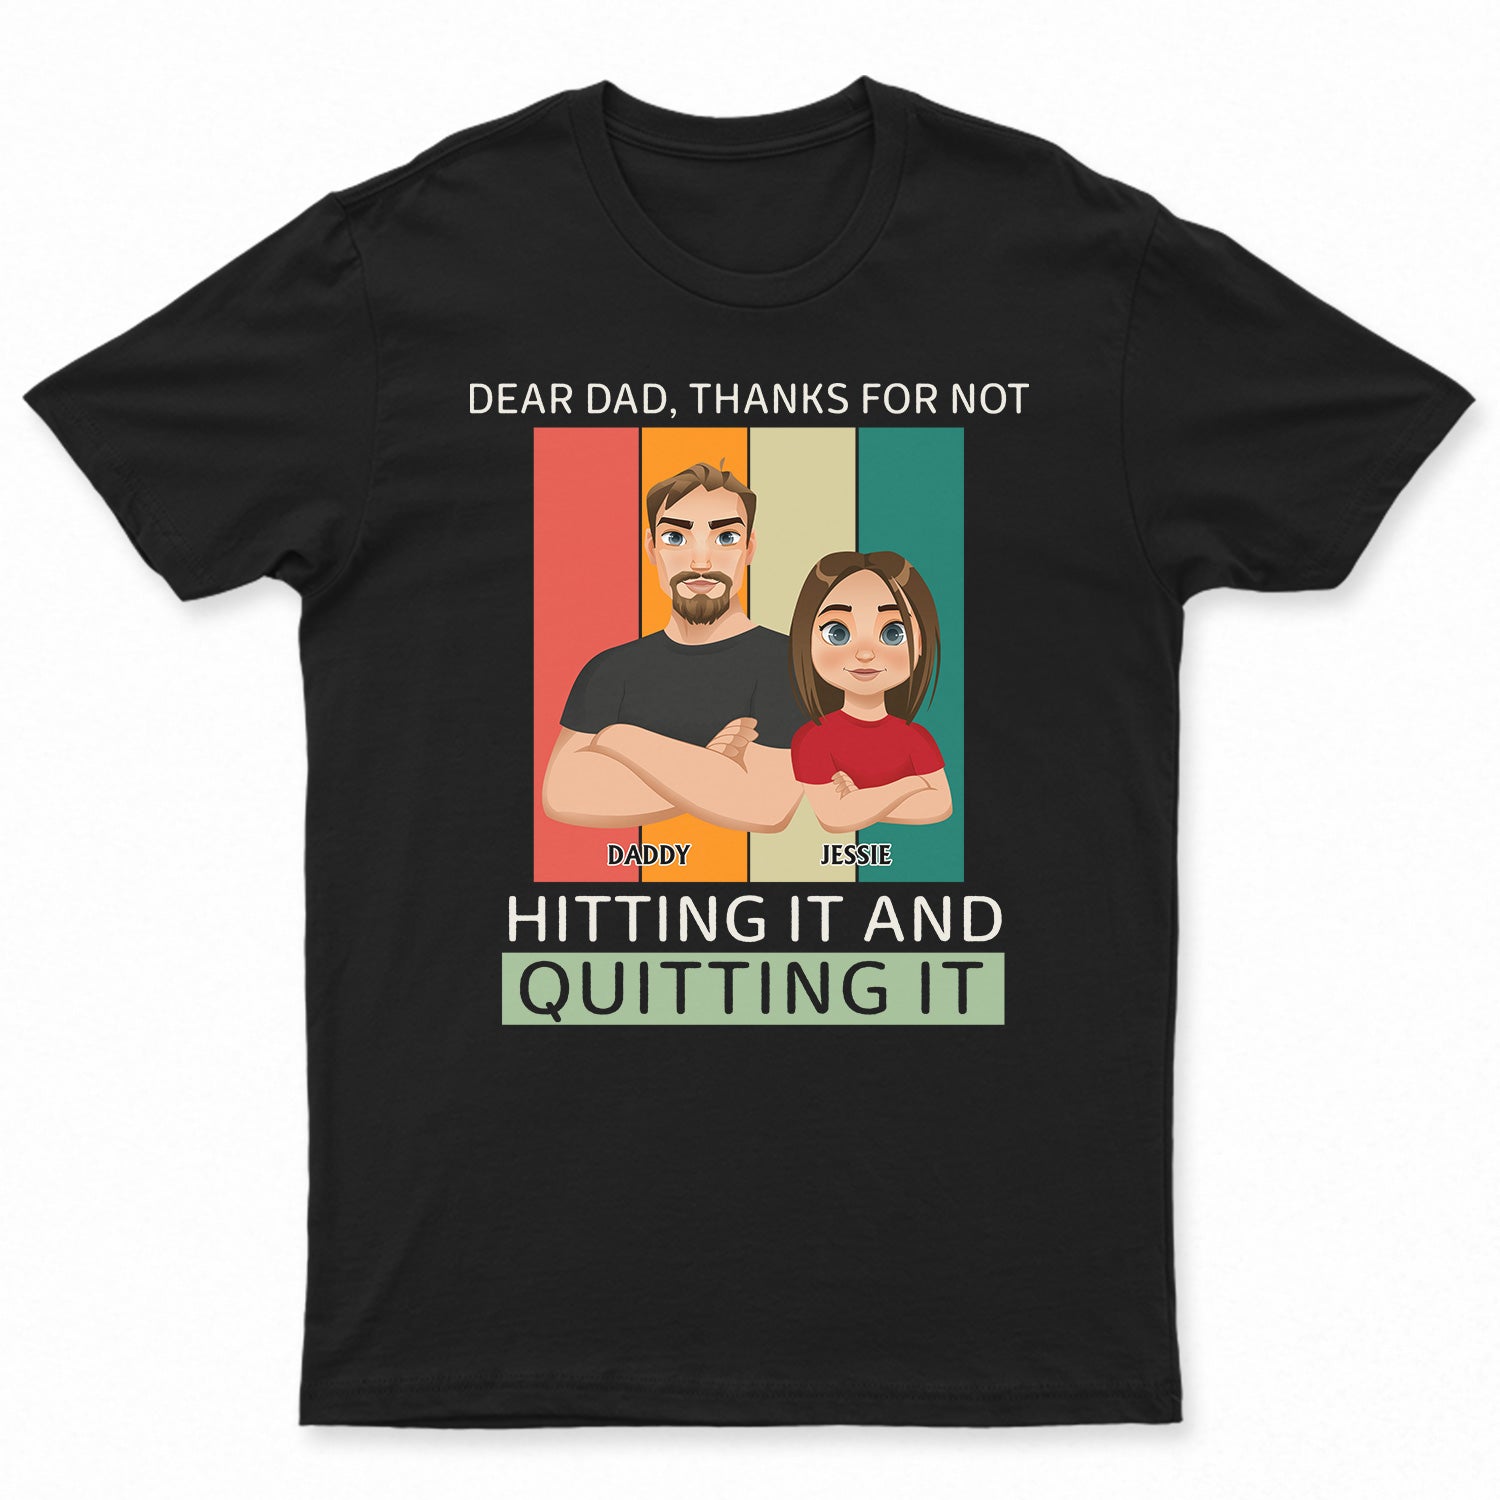 Dear Dad Thanks For Not Hitting It And Quitting It Funny Gift - Personalized T Shirt